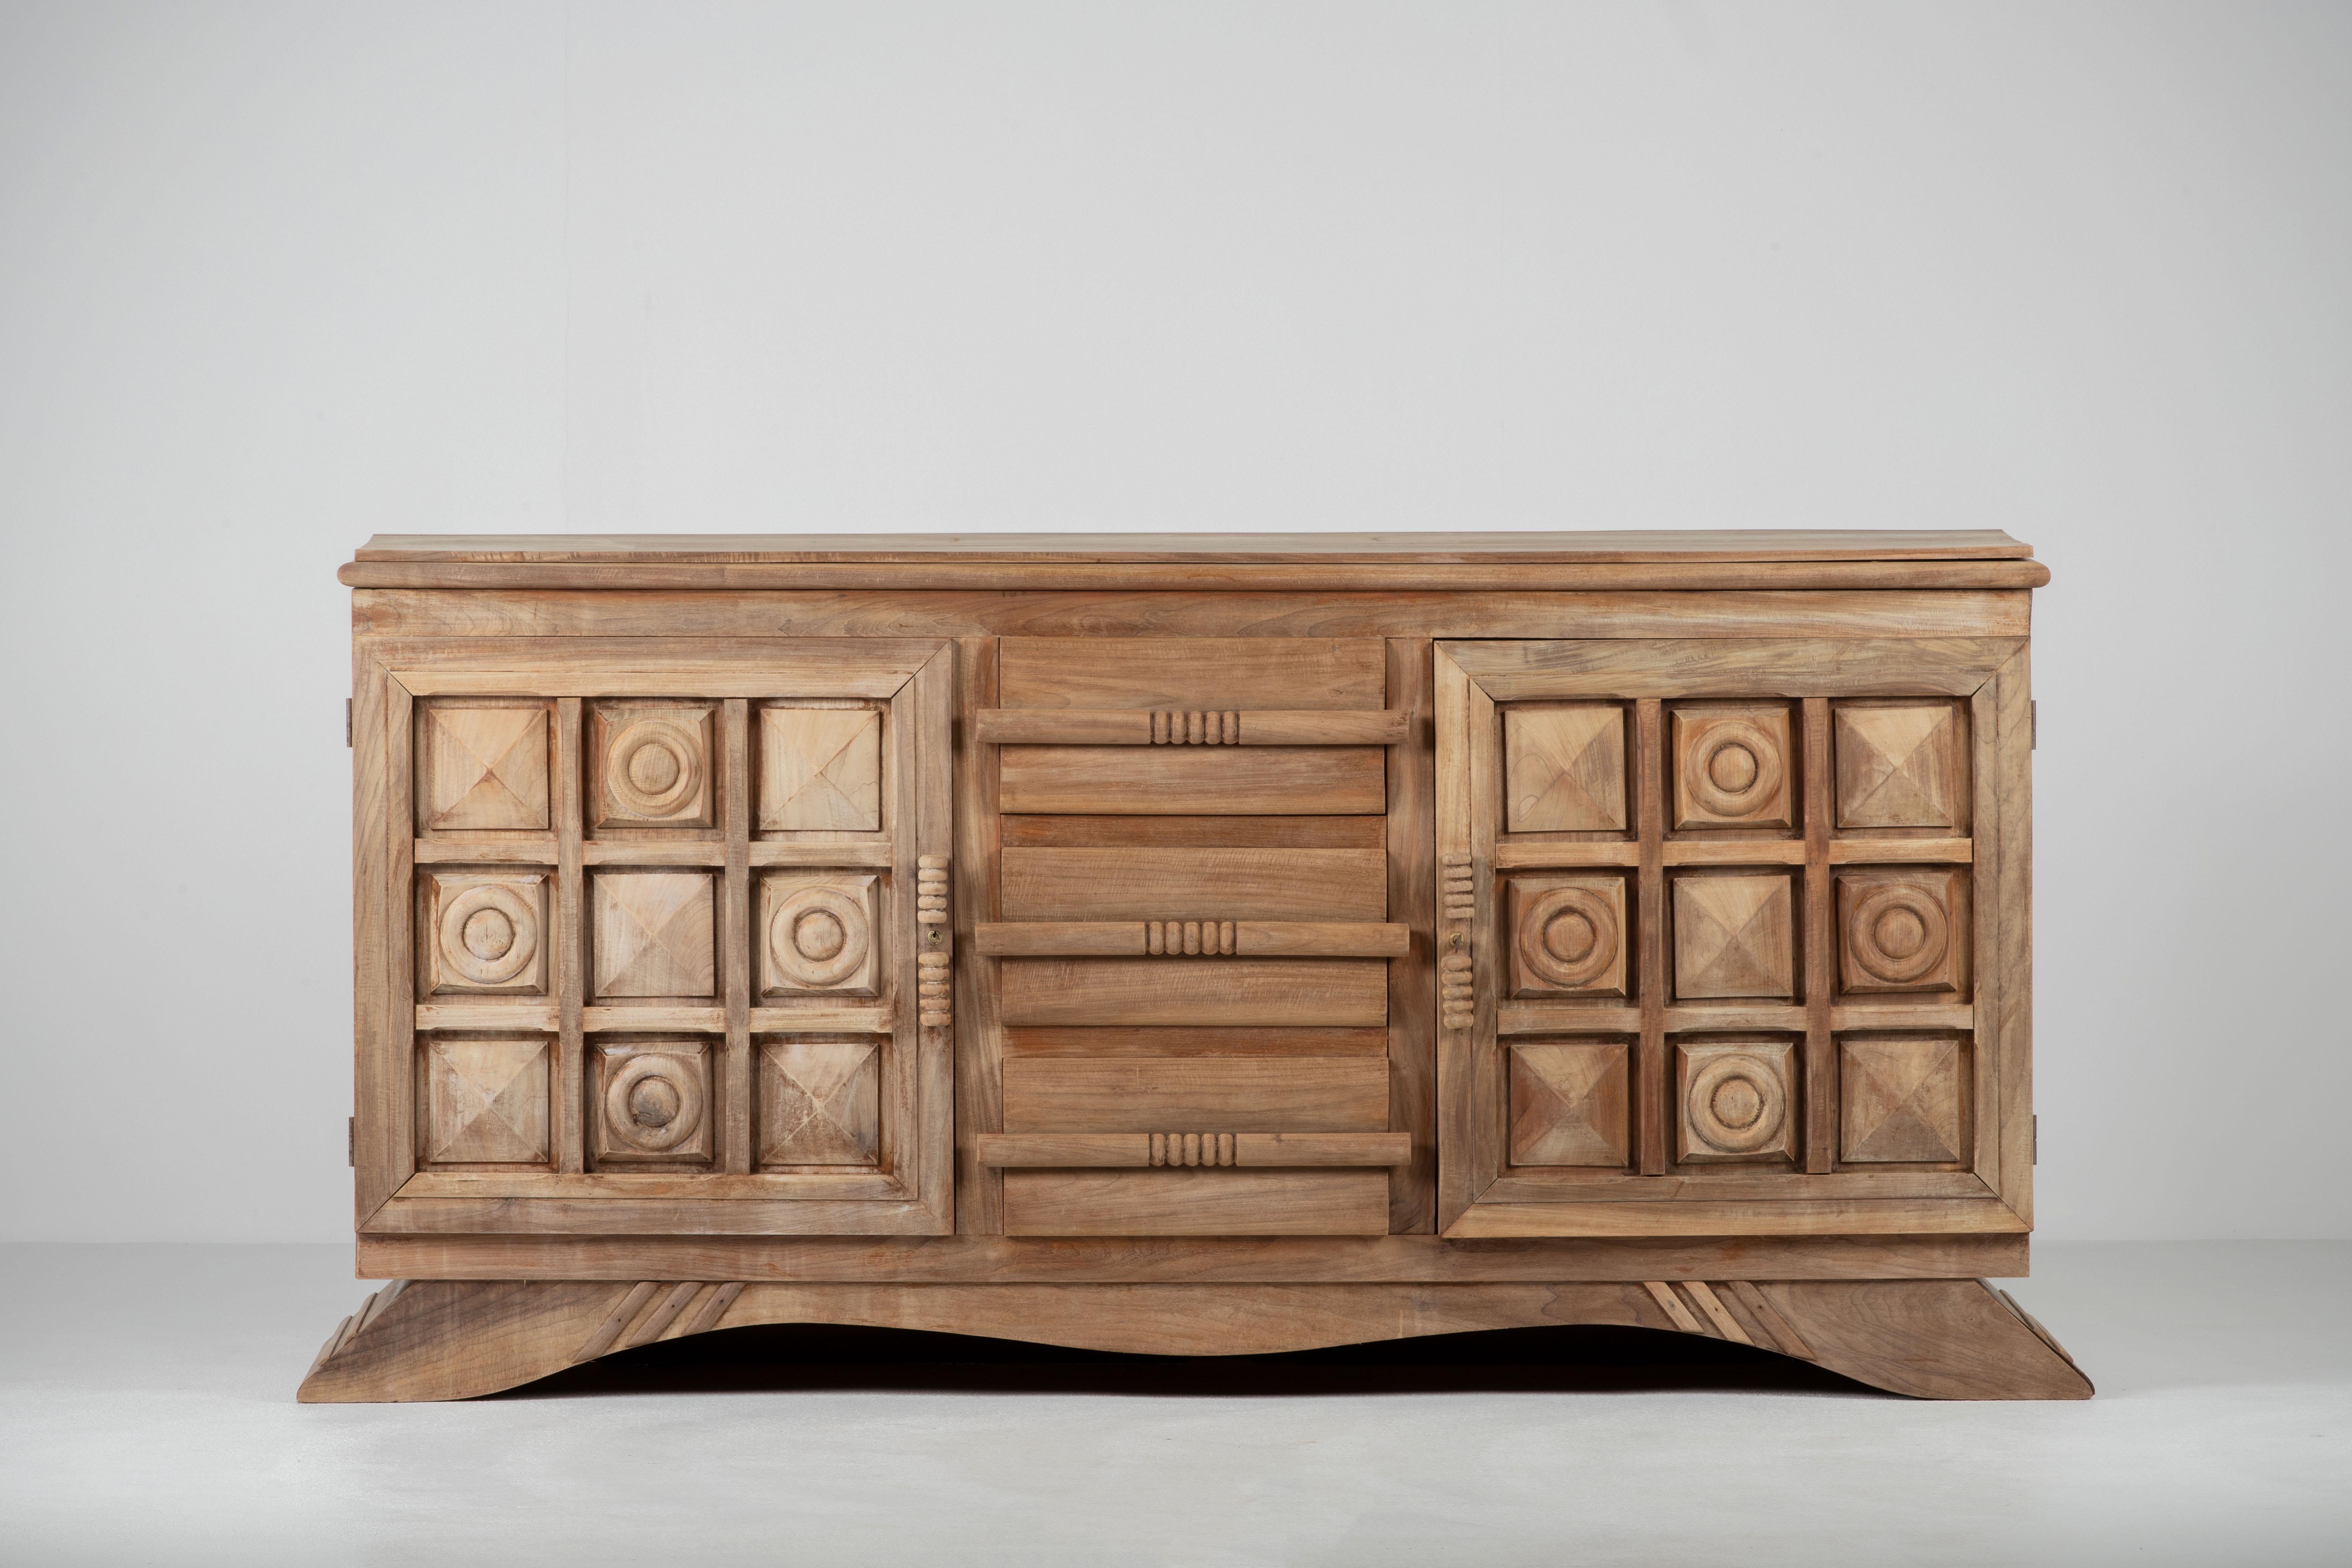 Very elegant Credenza in solid oak, France, 1940s.
Large Art Deco Brutalist sideboard. 
The credenza consists of two storage facilities and a central drawers column.
It is covered with very detailed designed doors. 
Very elegant 
The refined